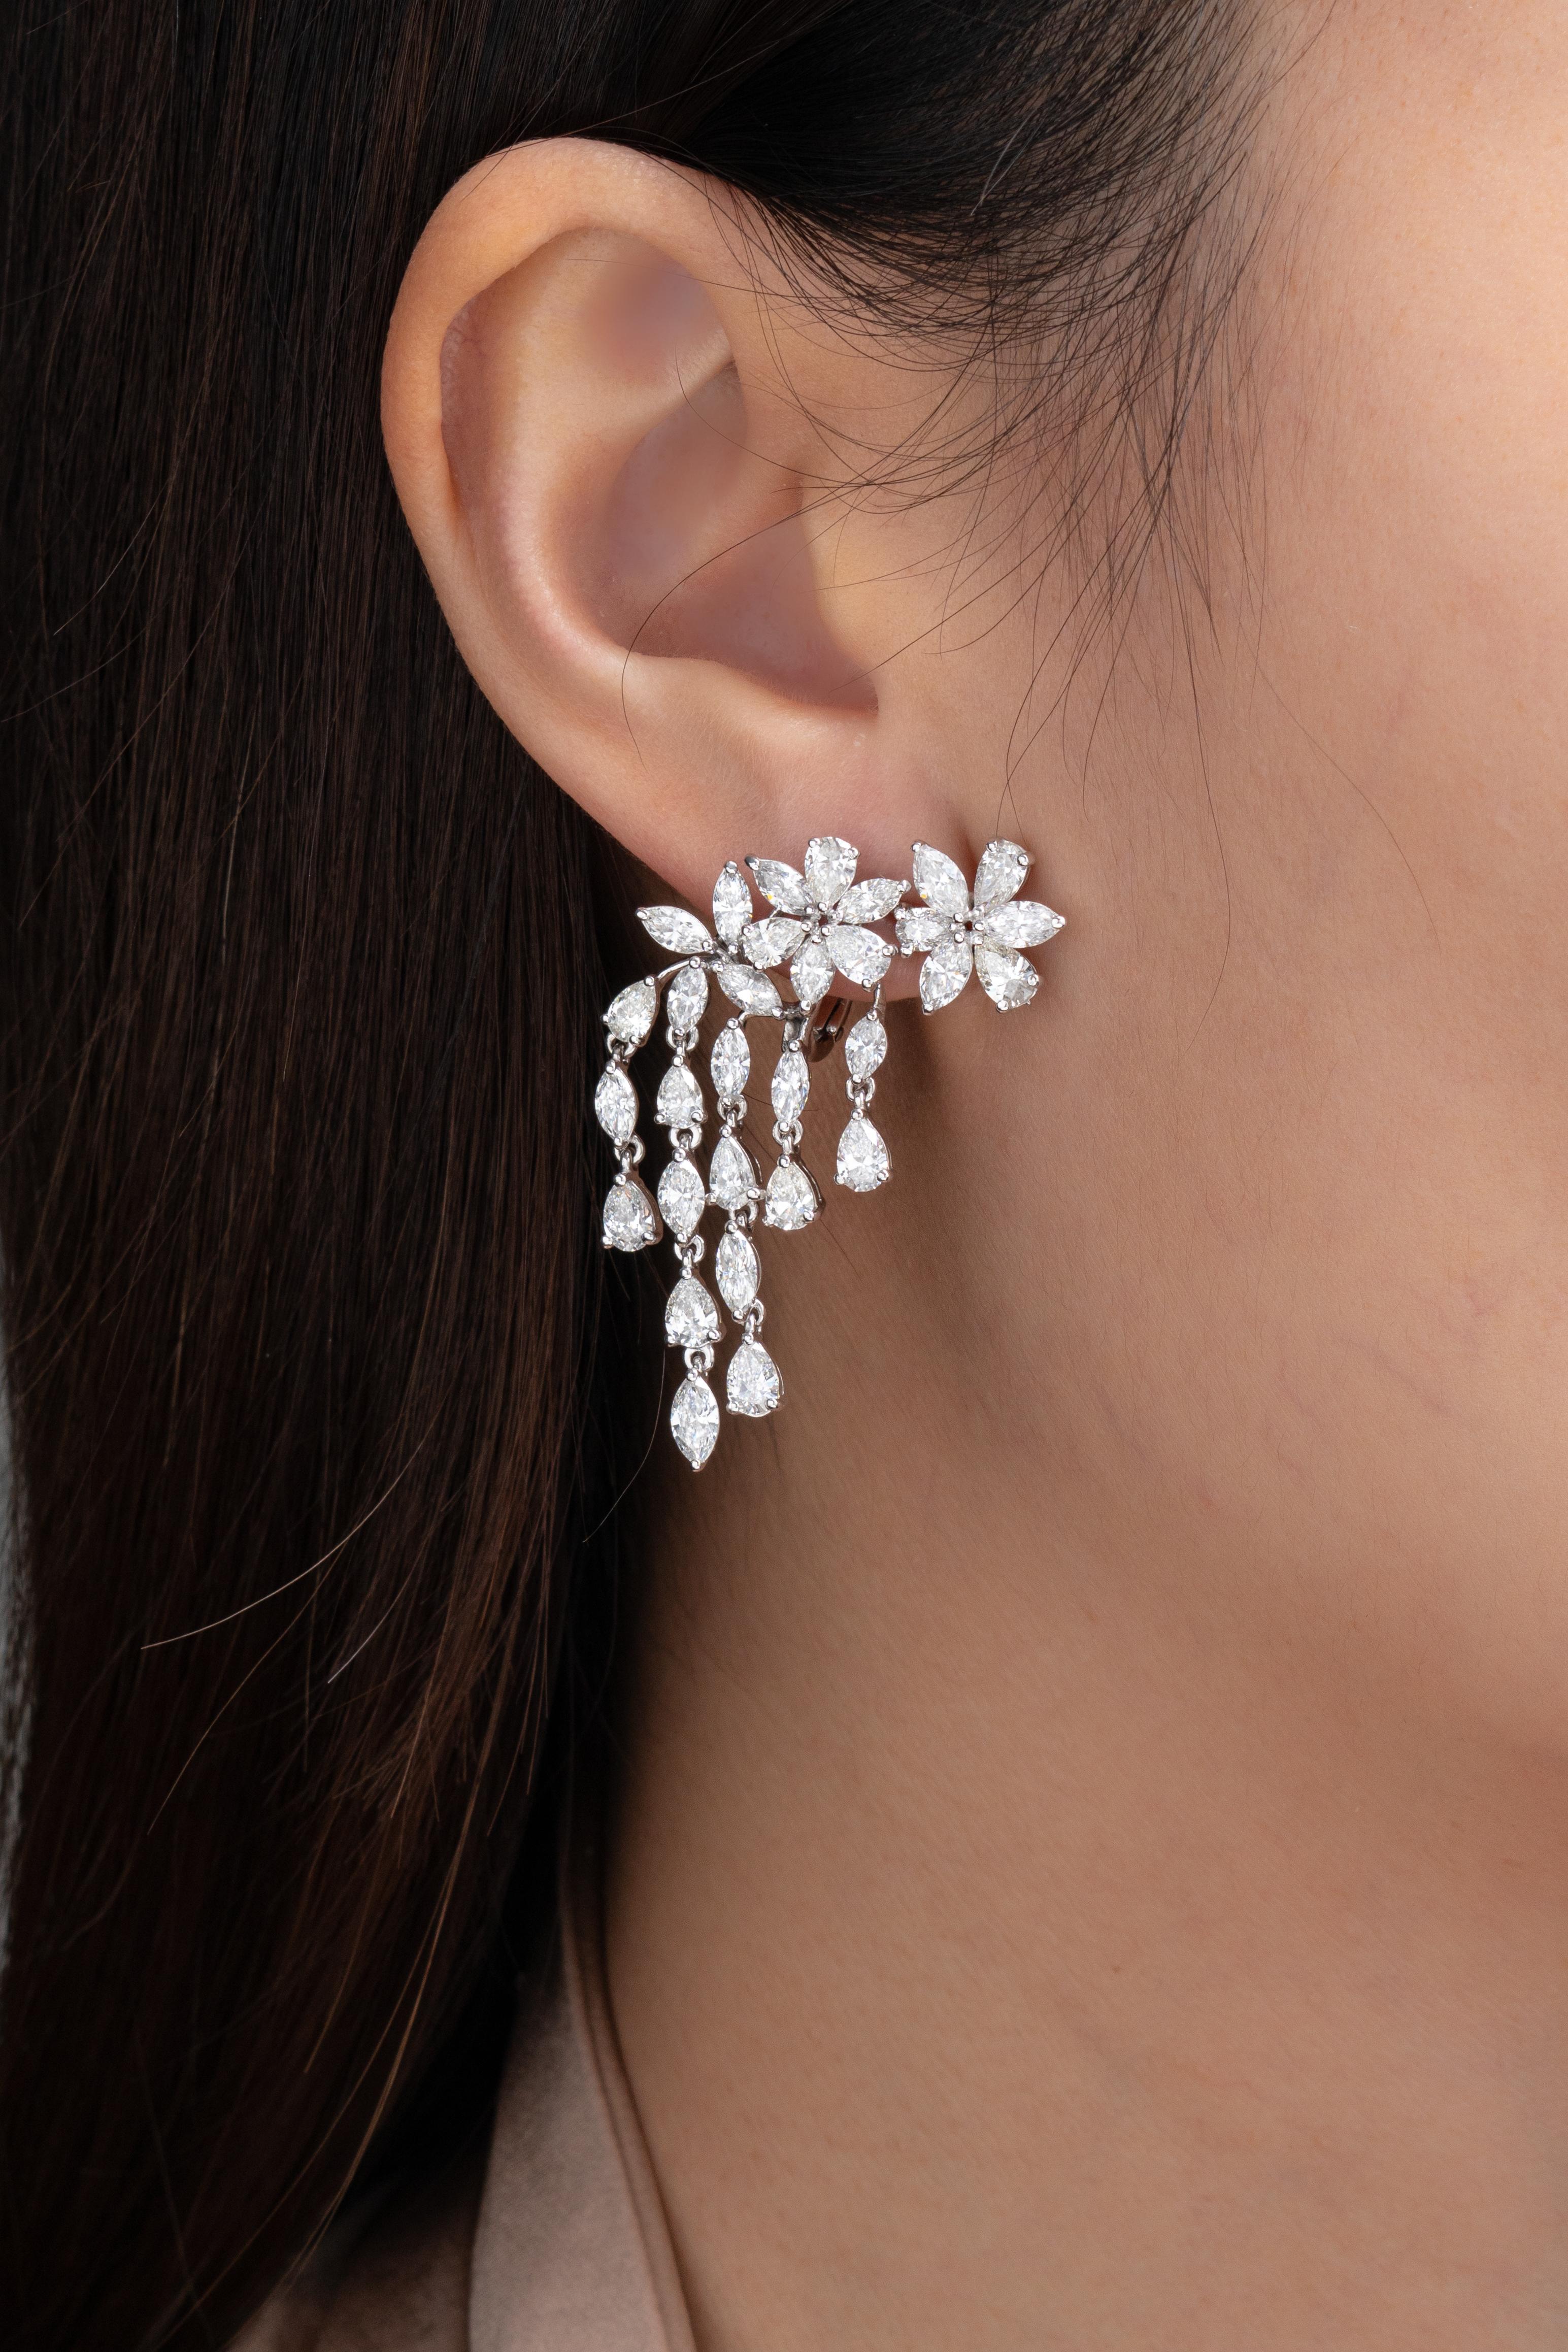 Cascade in diamonds while wearing these beautiful chandelier diamond earrings from Vihari Jewels. The earrings feature a floral motif with pear and marquise shaped diamonds with 5 cascading rows of diamonds delicately designed to hang in the